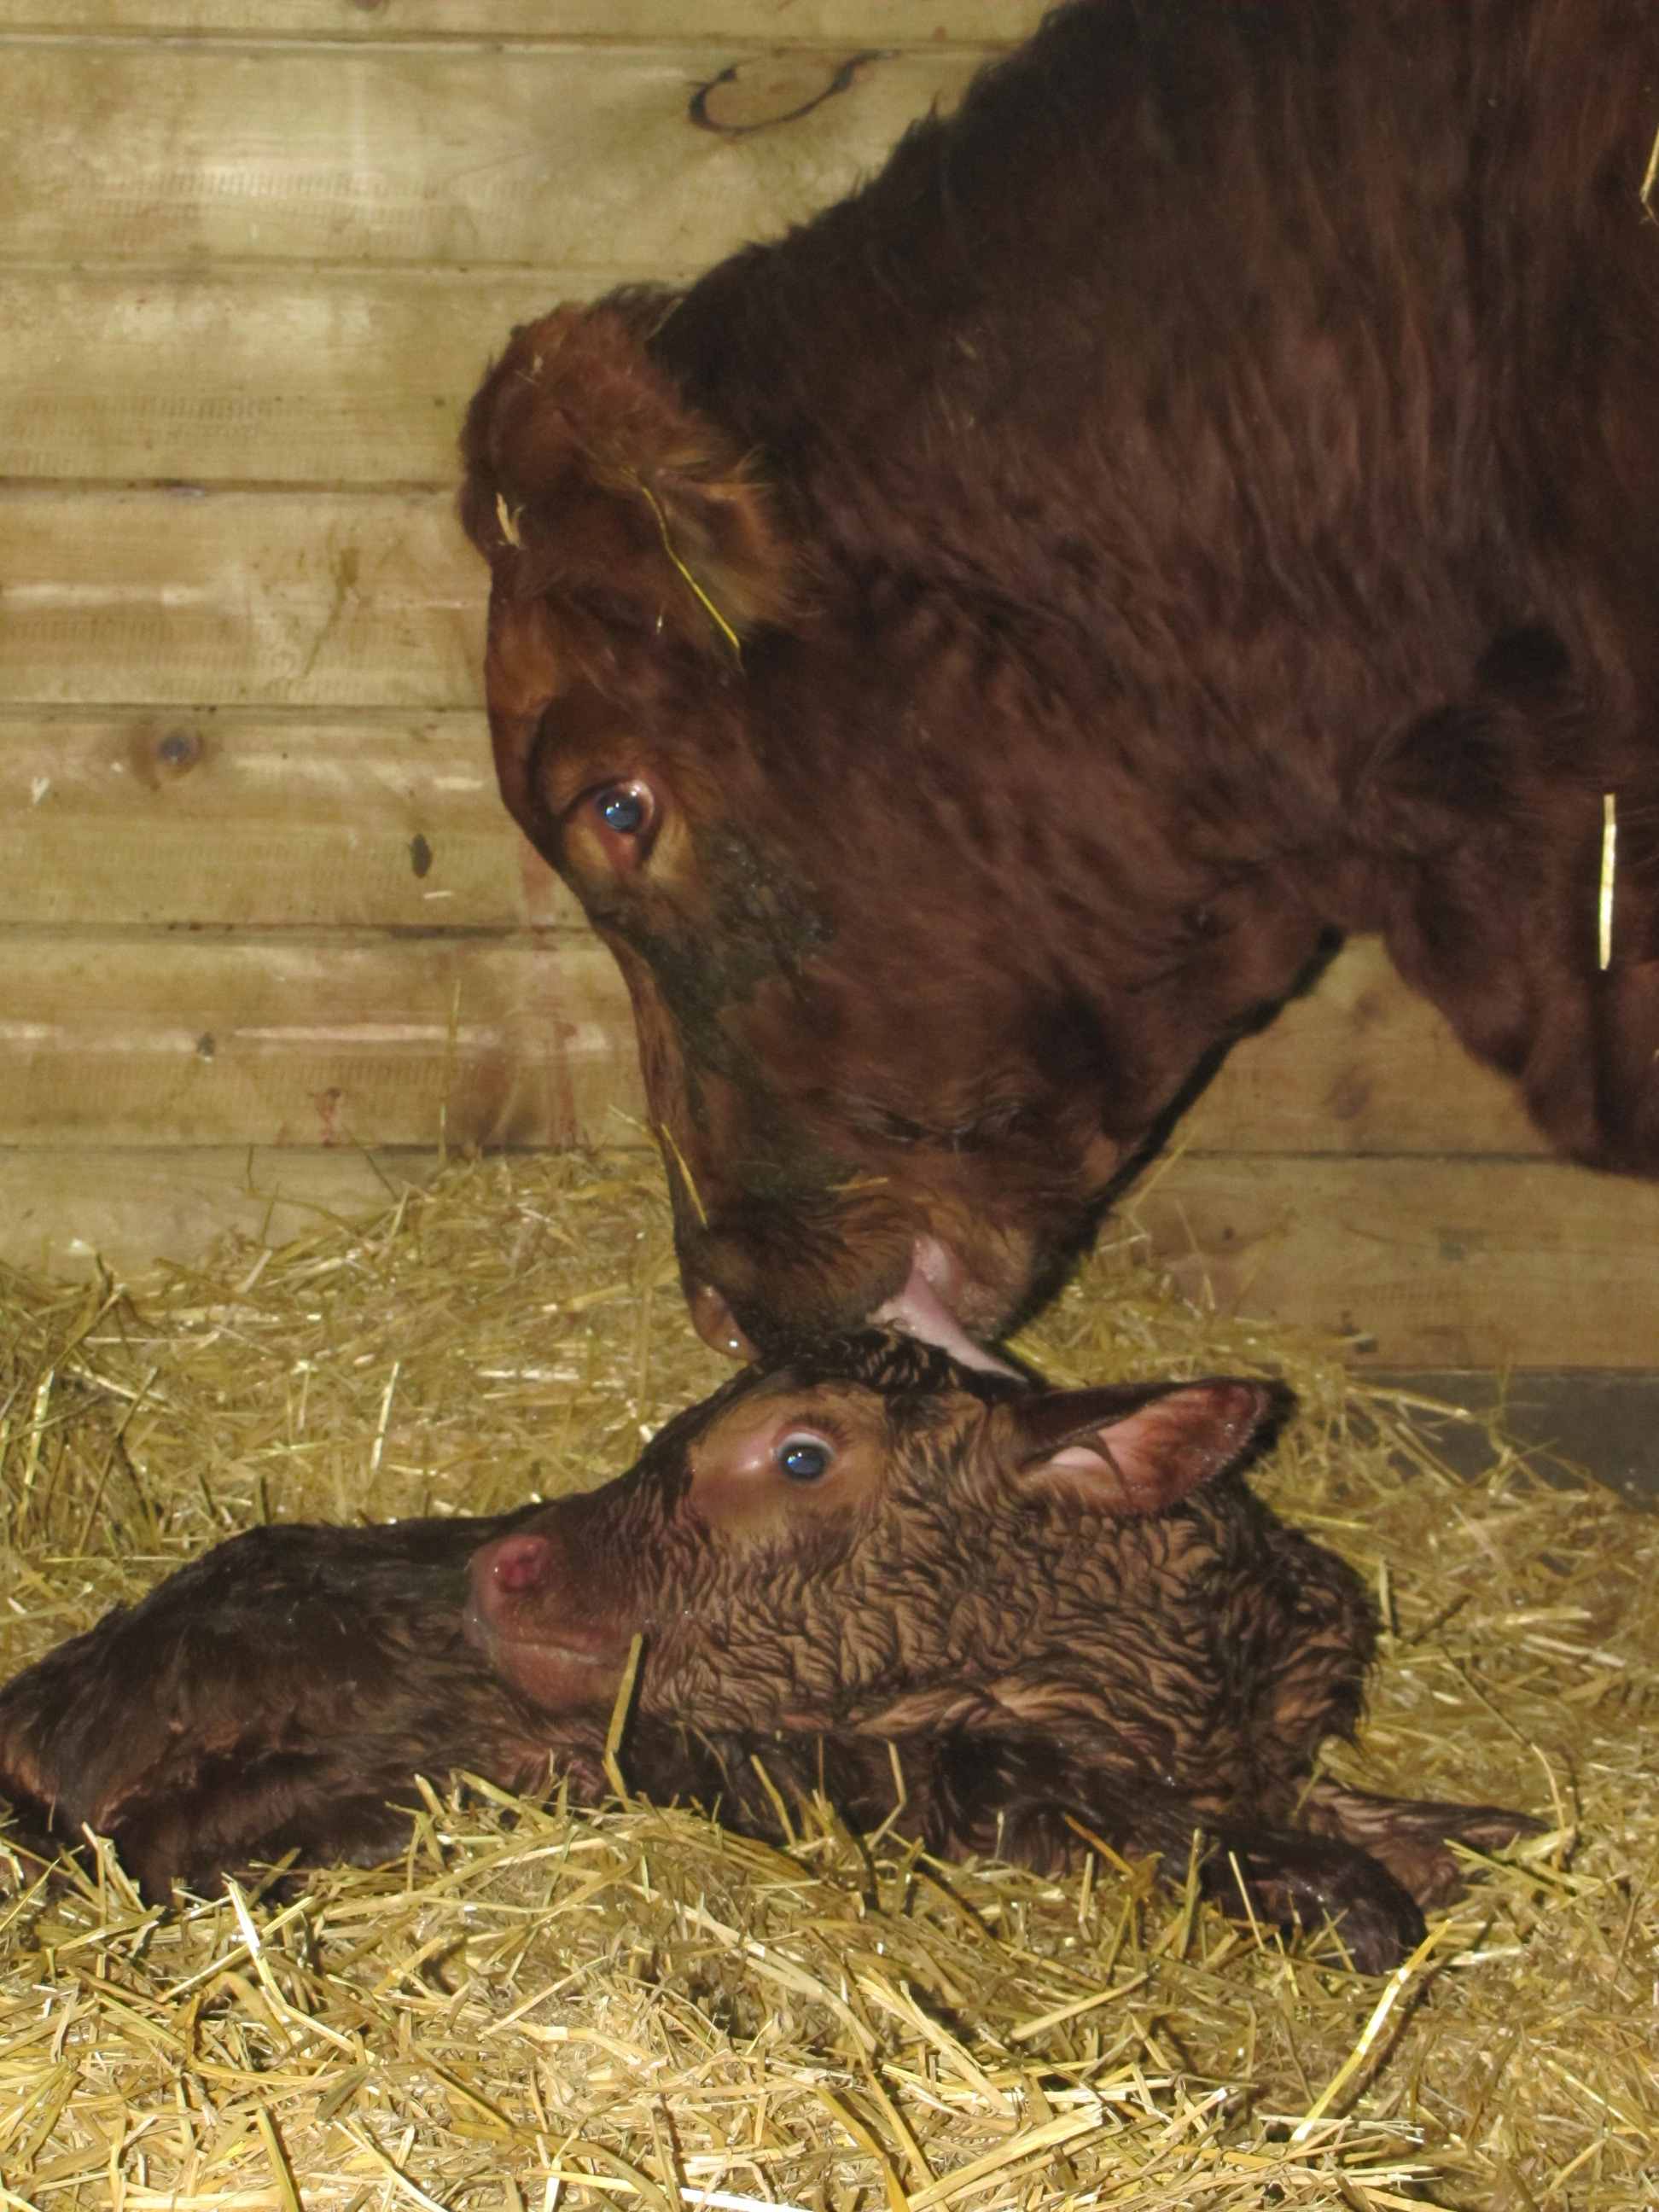 This winter's snowfall and bone-chilling temperatures have created diffcult calving conditions. (NDSU photo)